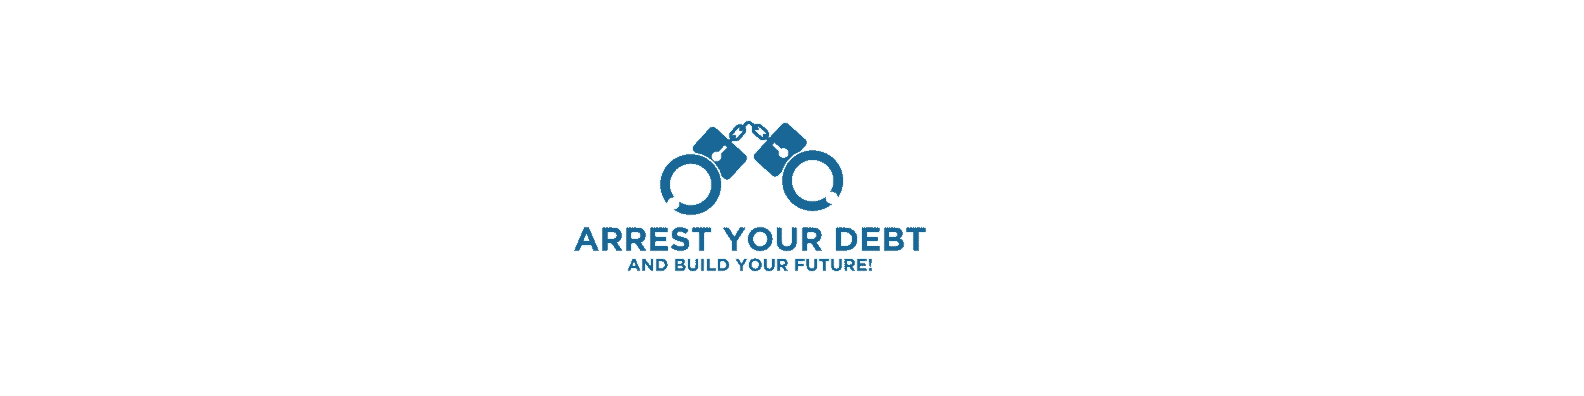 Logo featuring handcuffs with the slogan 'arrest your debt and build your future!'.